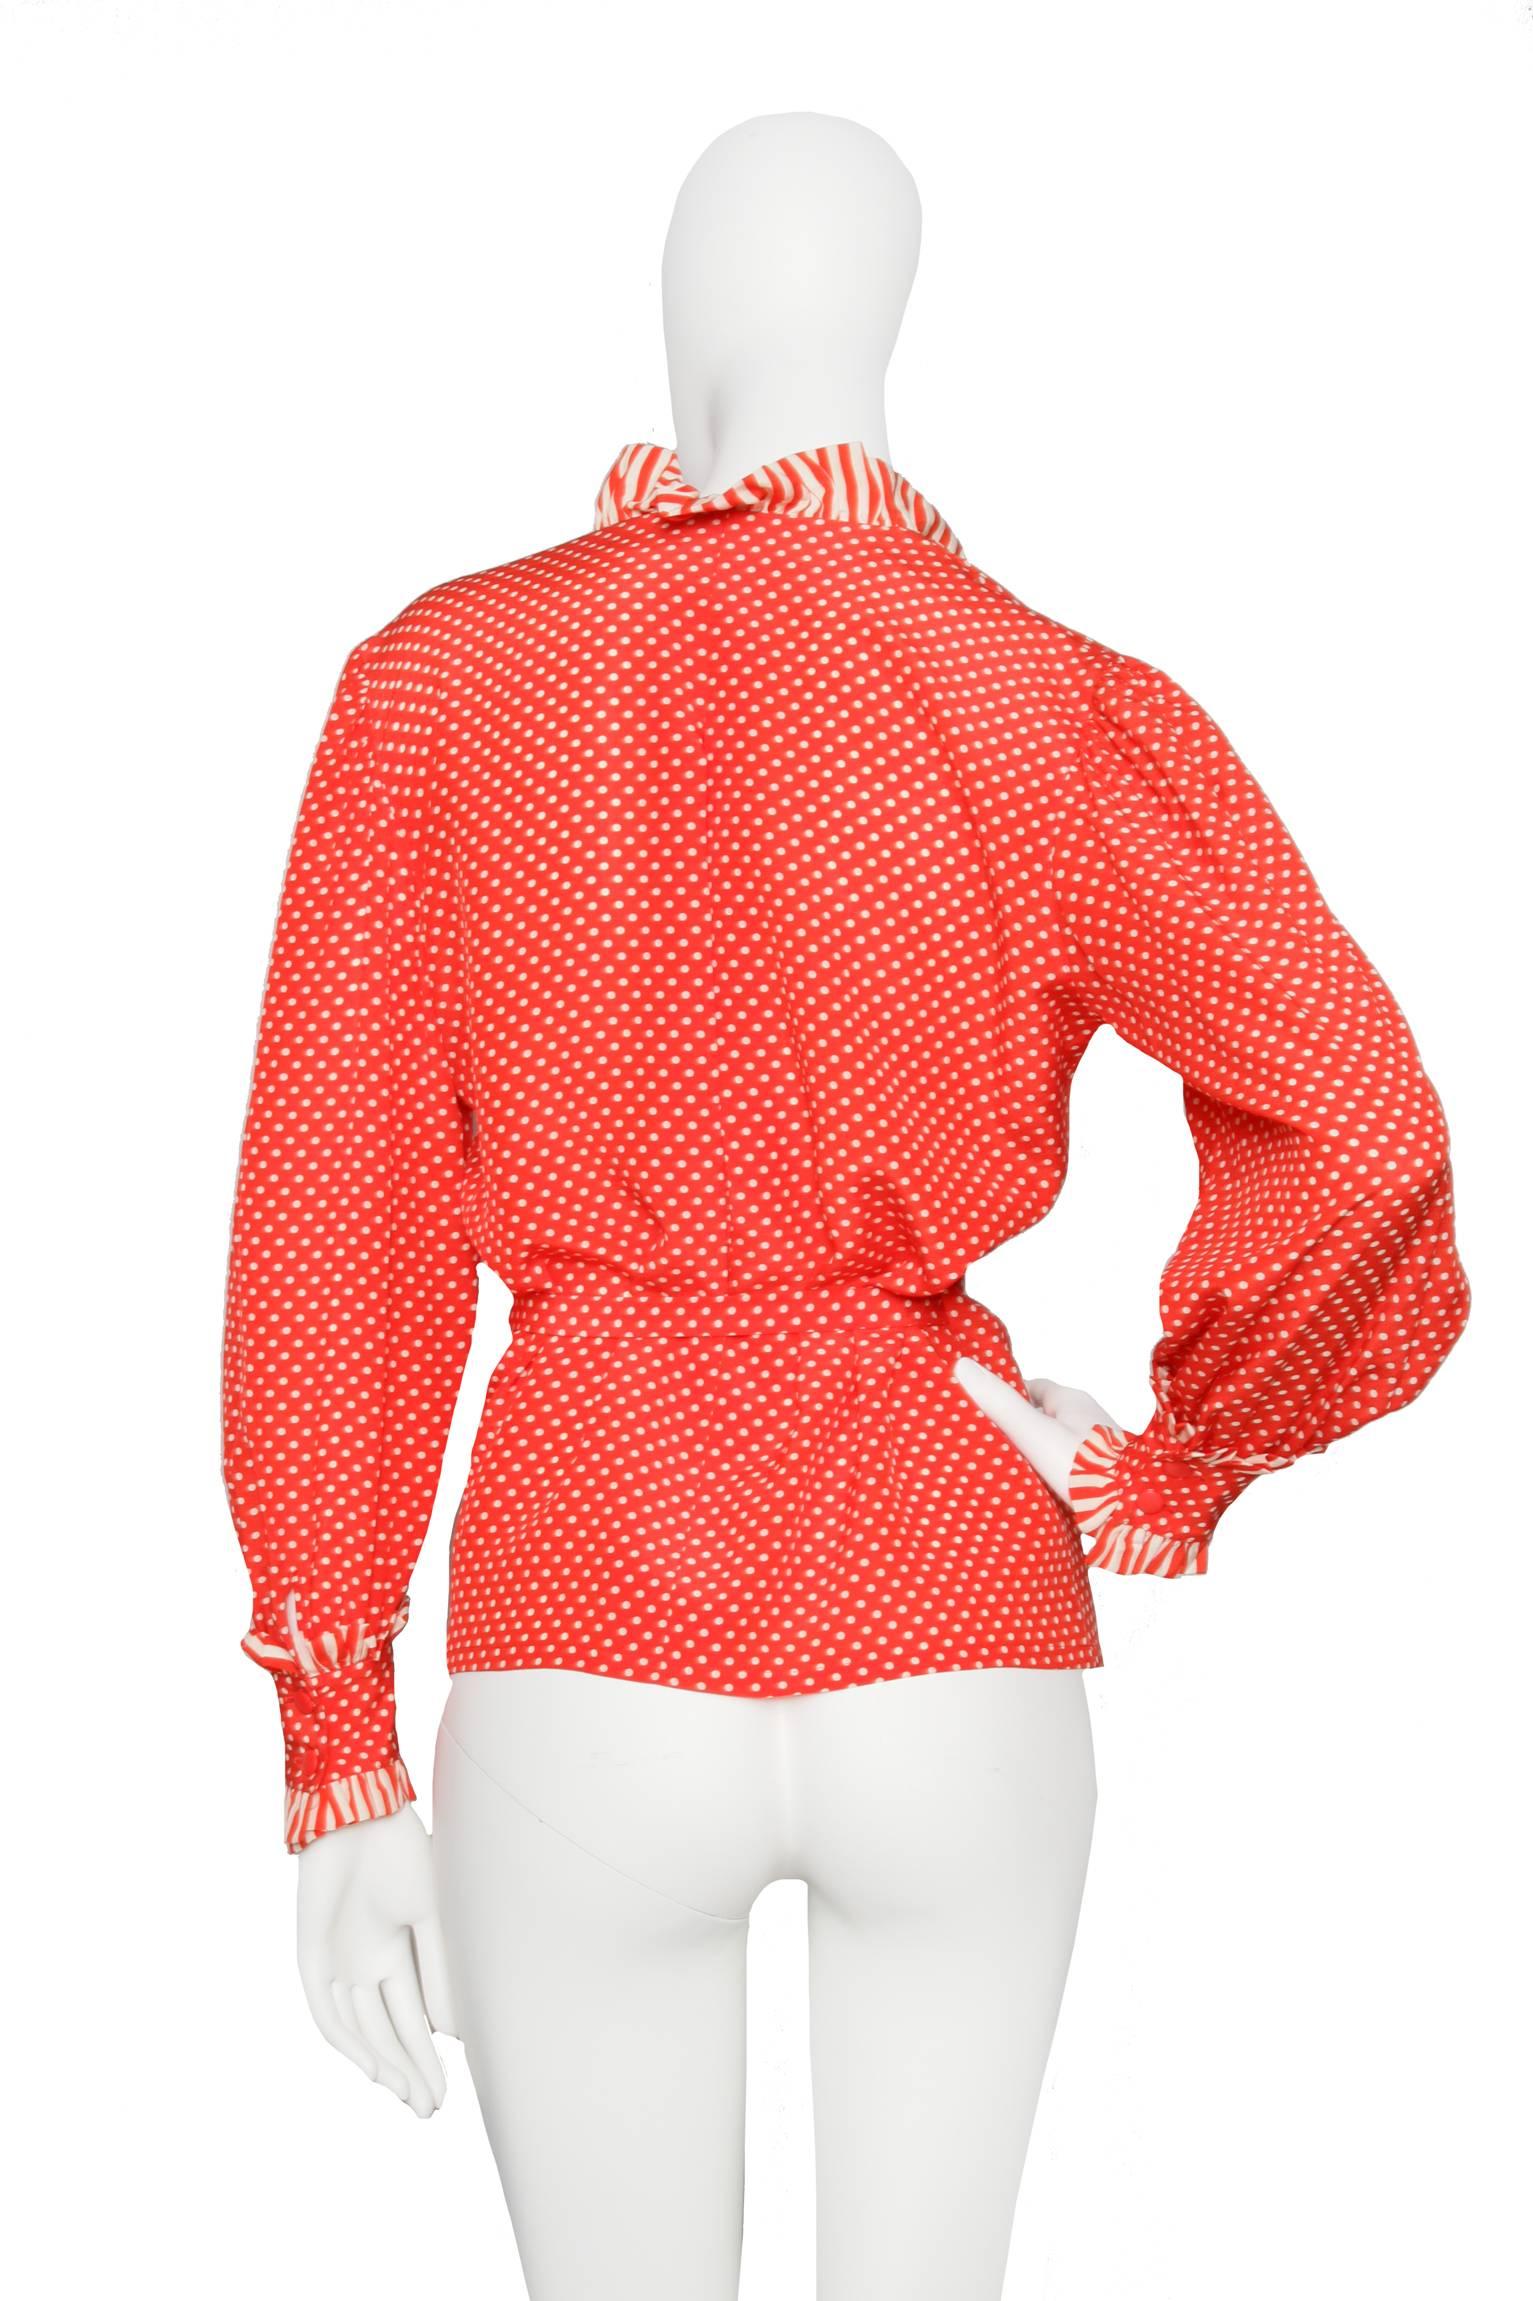 A bright red 1980s Christian Dior white polka dot wrap blouse with long sleeves and a contrasting candy striped trim around the neckline and cuffs.The blouse has two buttoned cuffs and closes in the side with a long tie belt. 

The size of the